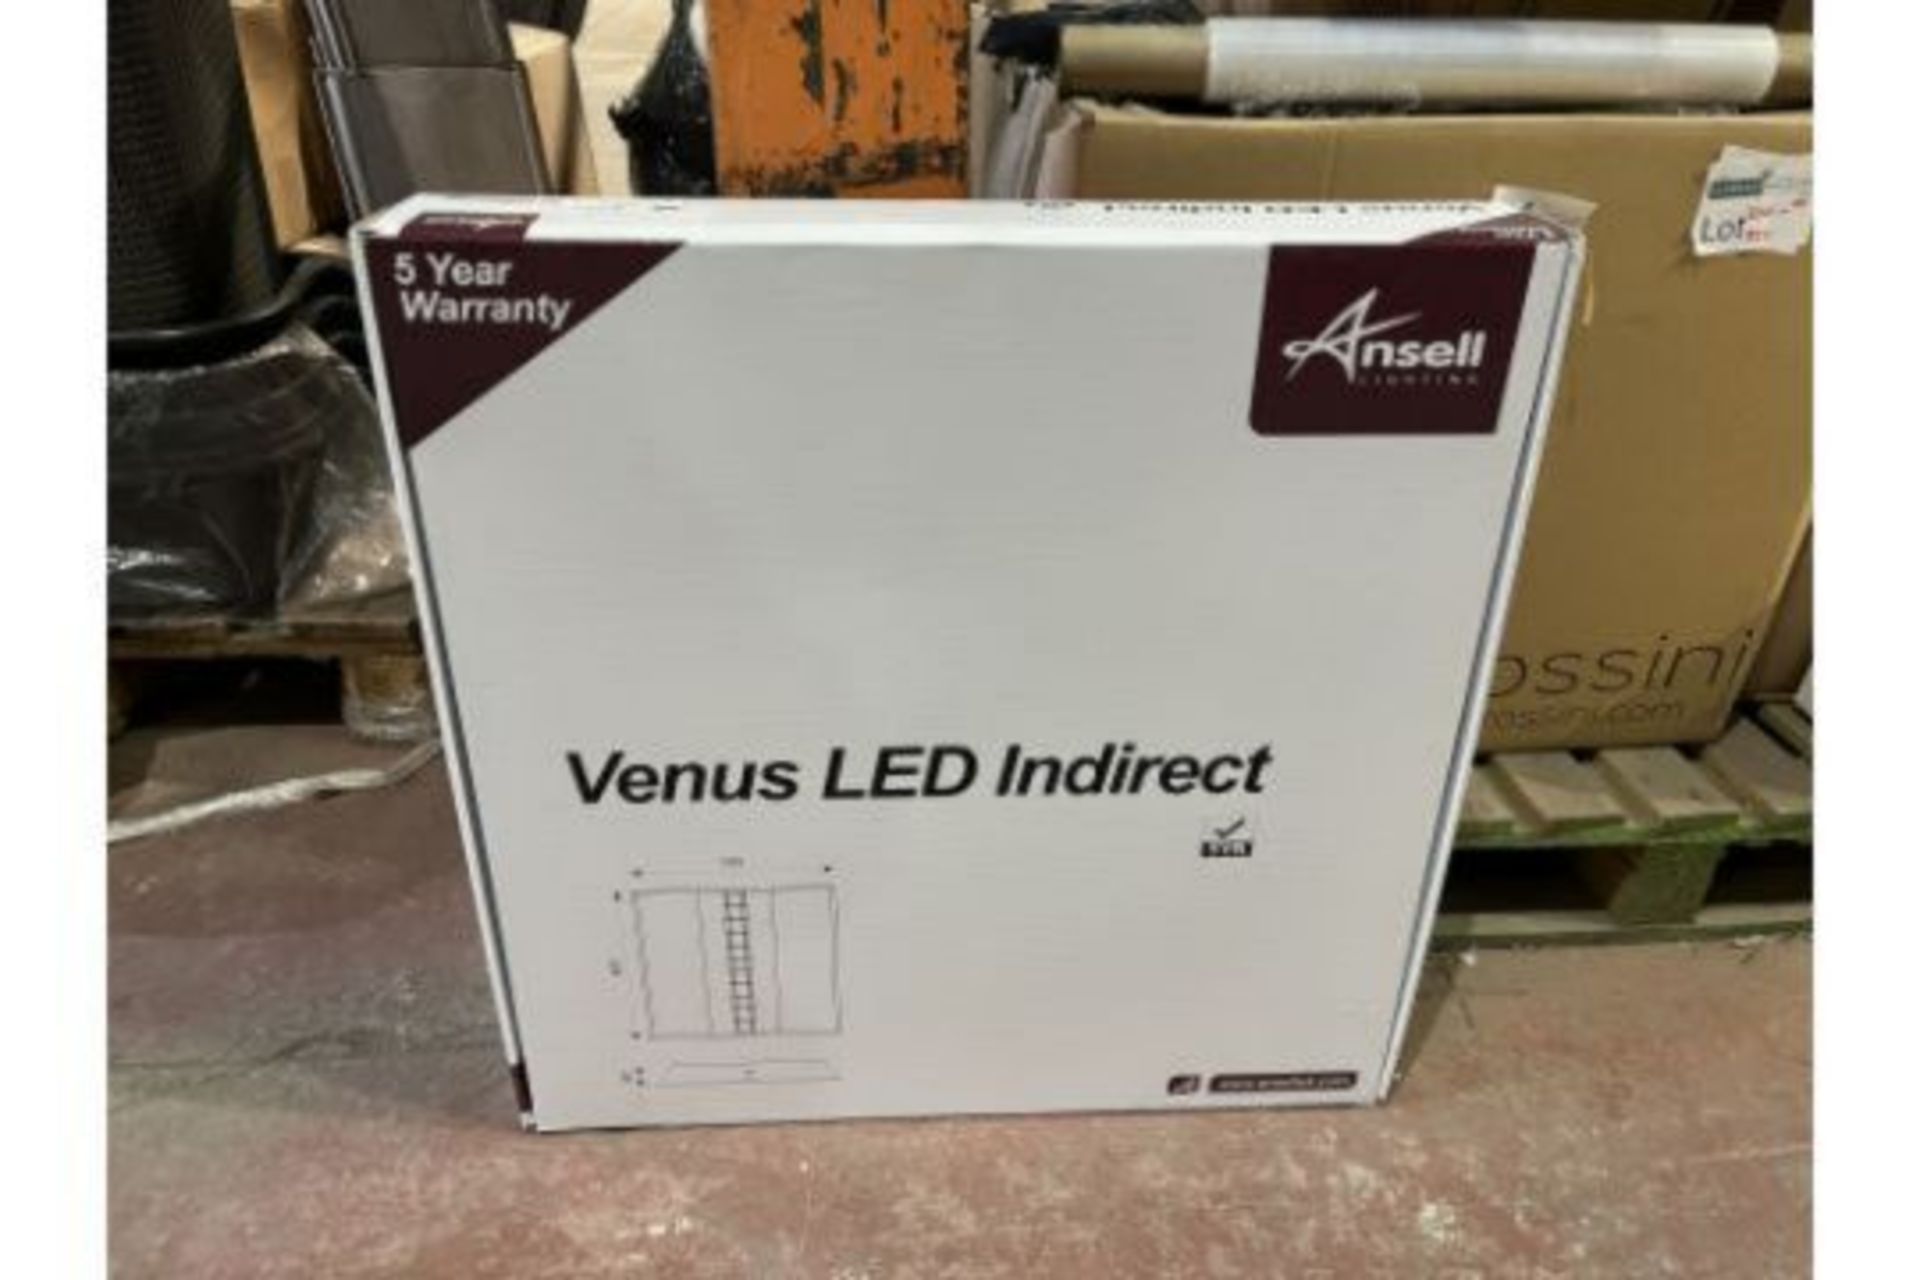 2 x NEW BOXED ANSELL Venus 4K LED indirect Light LED Ceiling Panel 600x600mm. 40W. RRP £255 EACH.